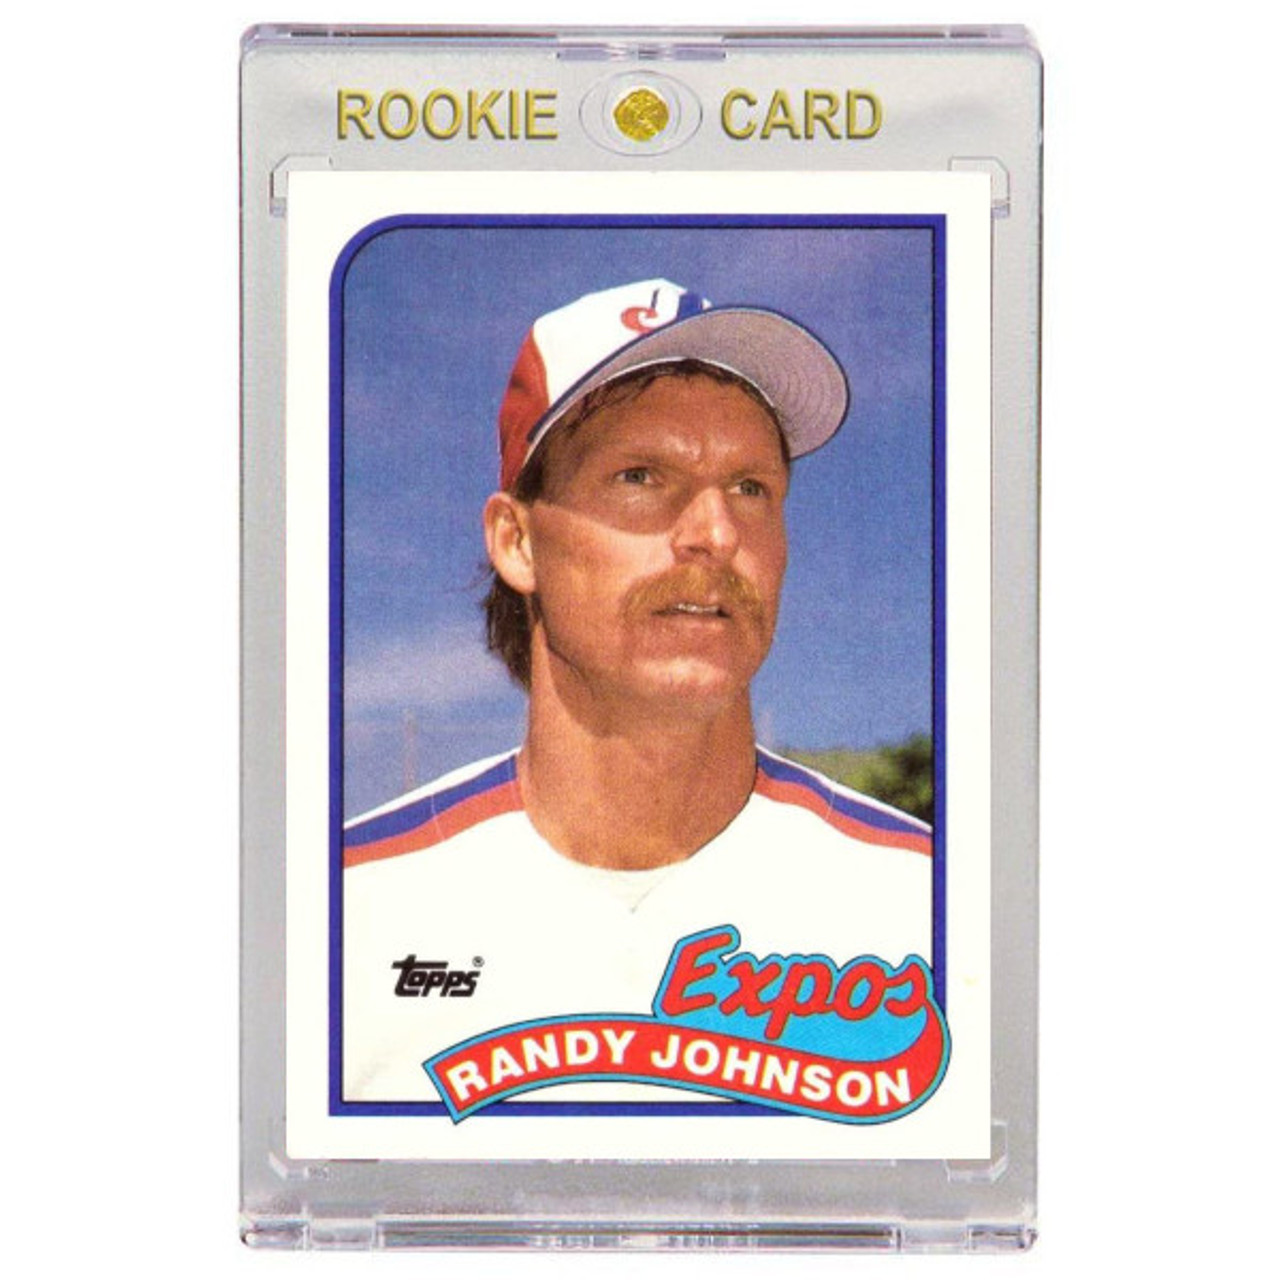 1989 Topps #647 Randy Johnson rookie card - (Lot of 40 cards)